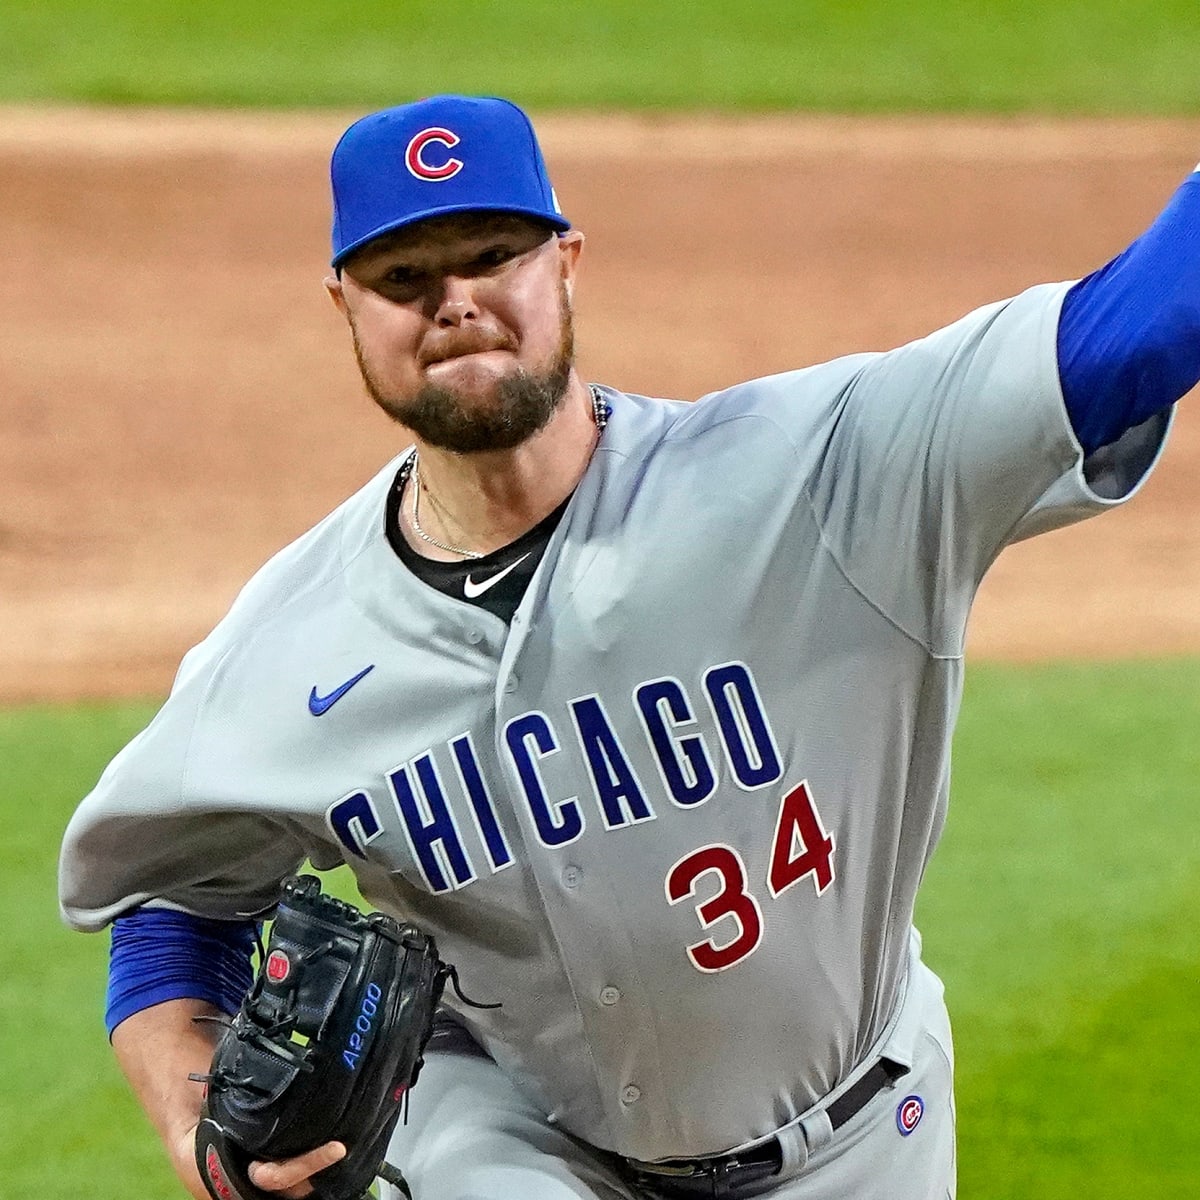 Jon Lester retires after epic MLB career as Red Sox, Cubs ace - Sports  Illustrated